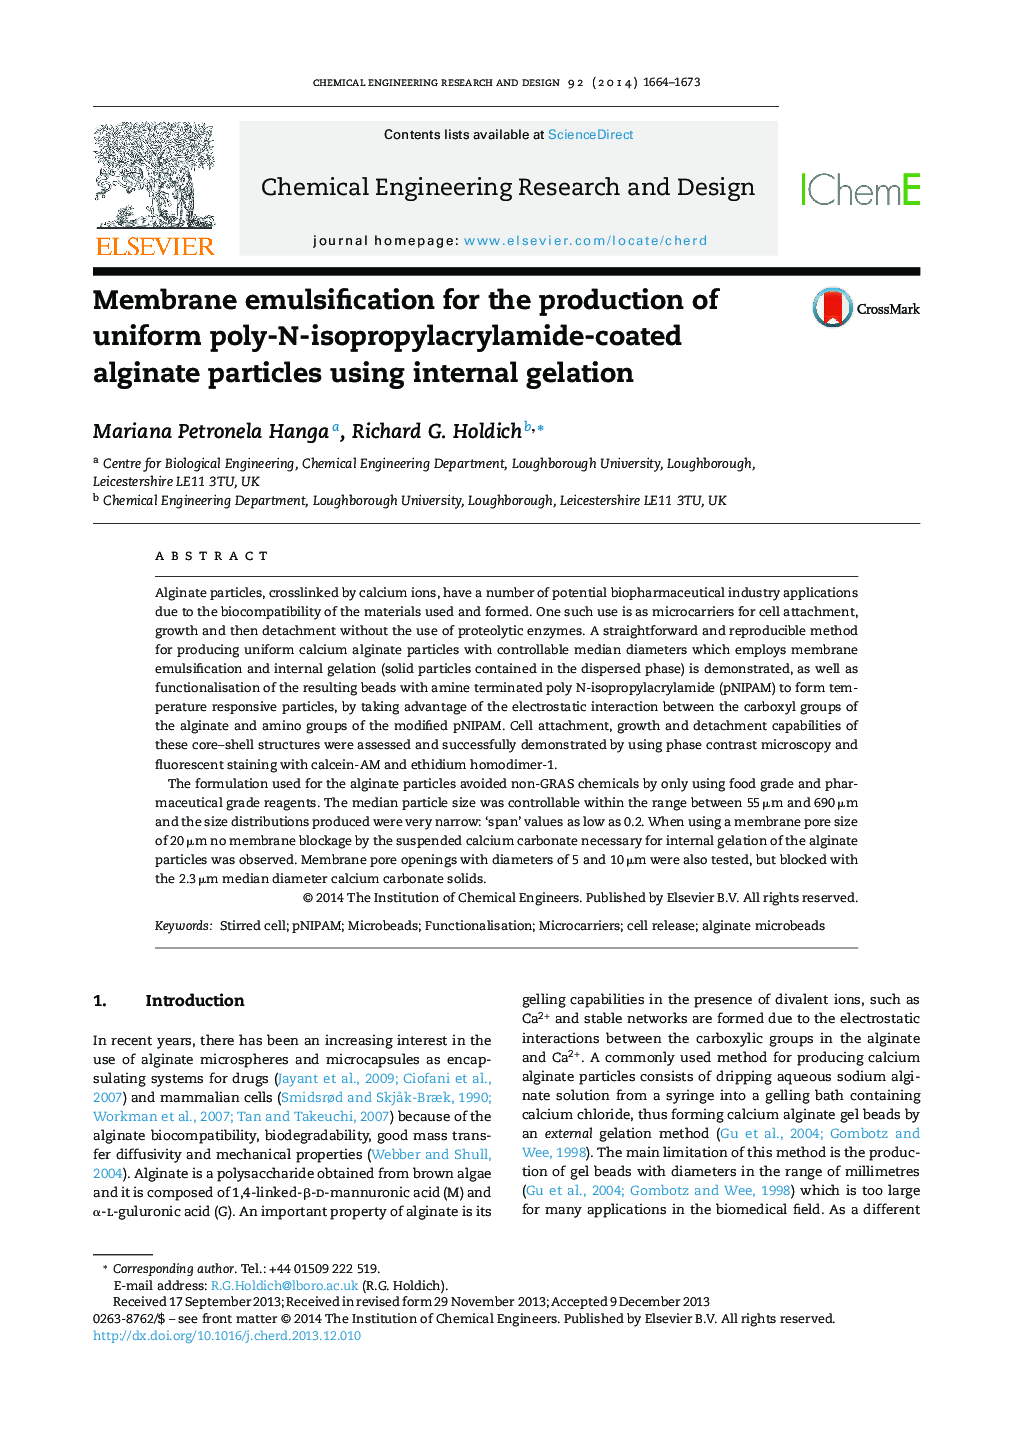 Membrane emulsification for the production of uniform poly-N-isopropylacrylamide-coated alginate particles using internal gelation